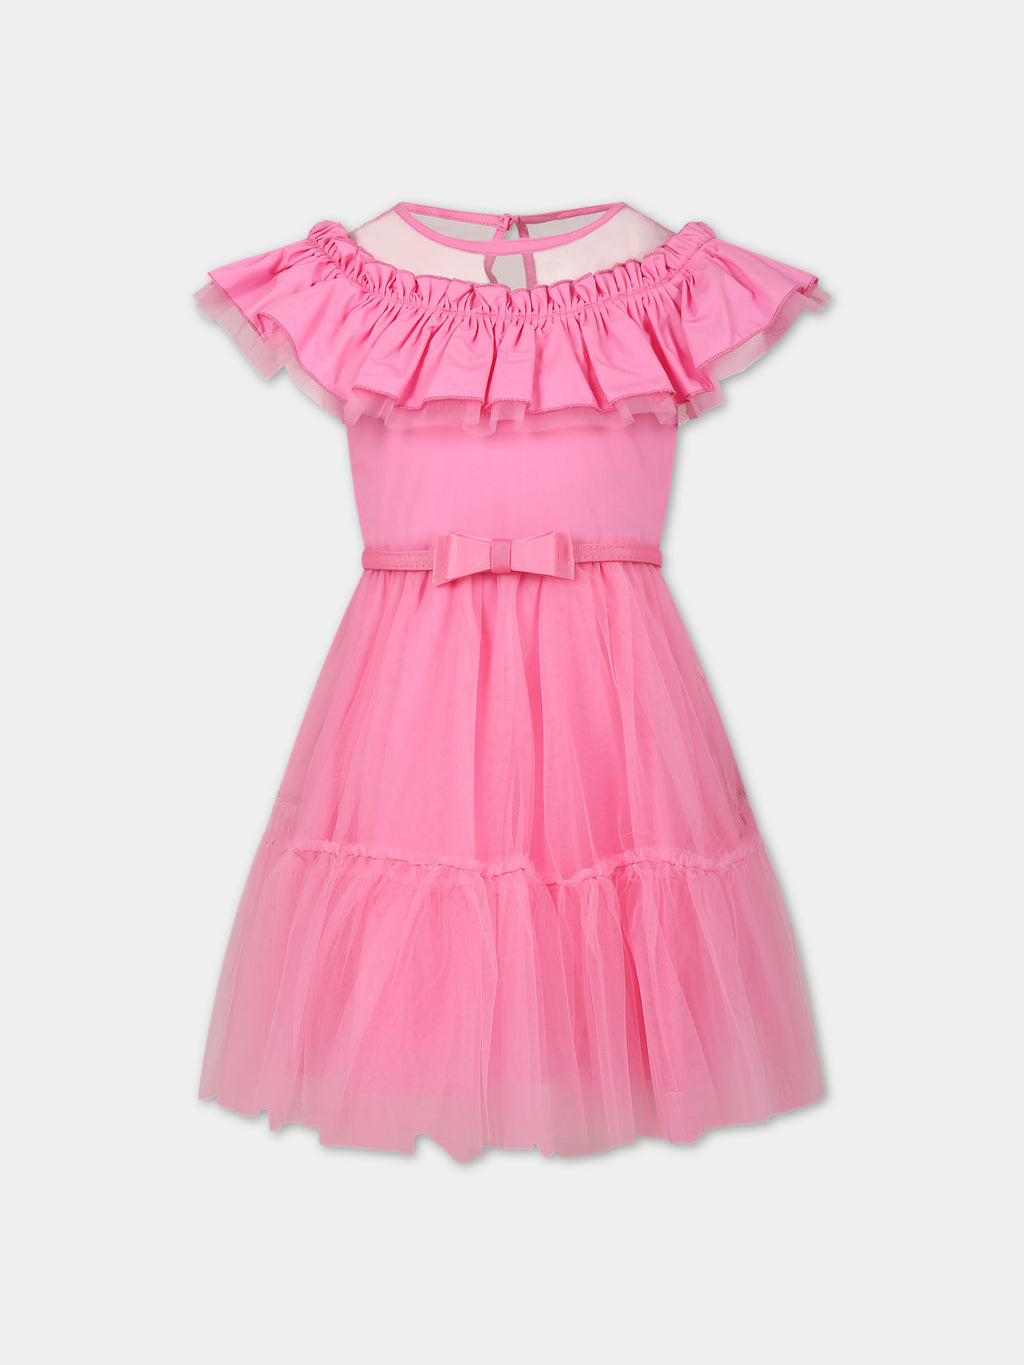 Pink dress for girl with tulle and ruffles